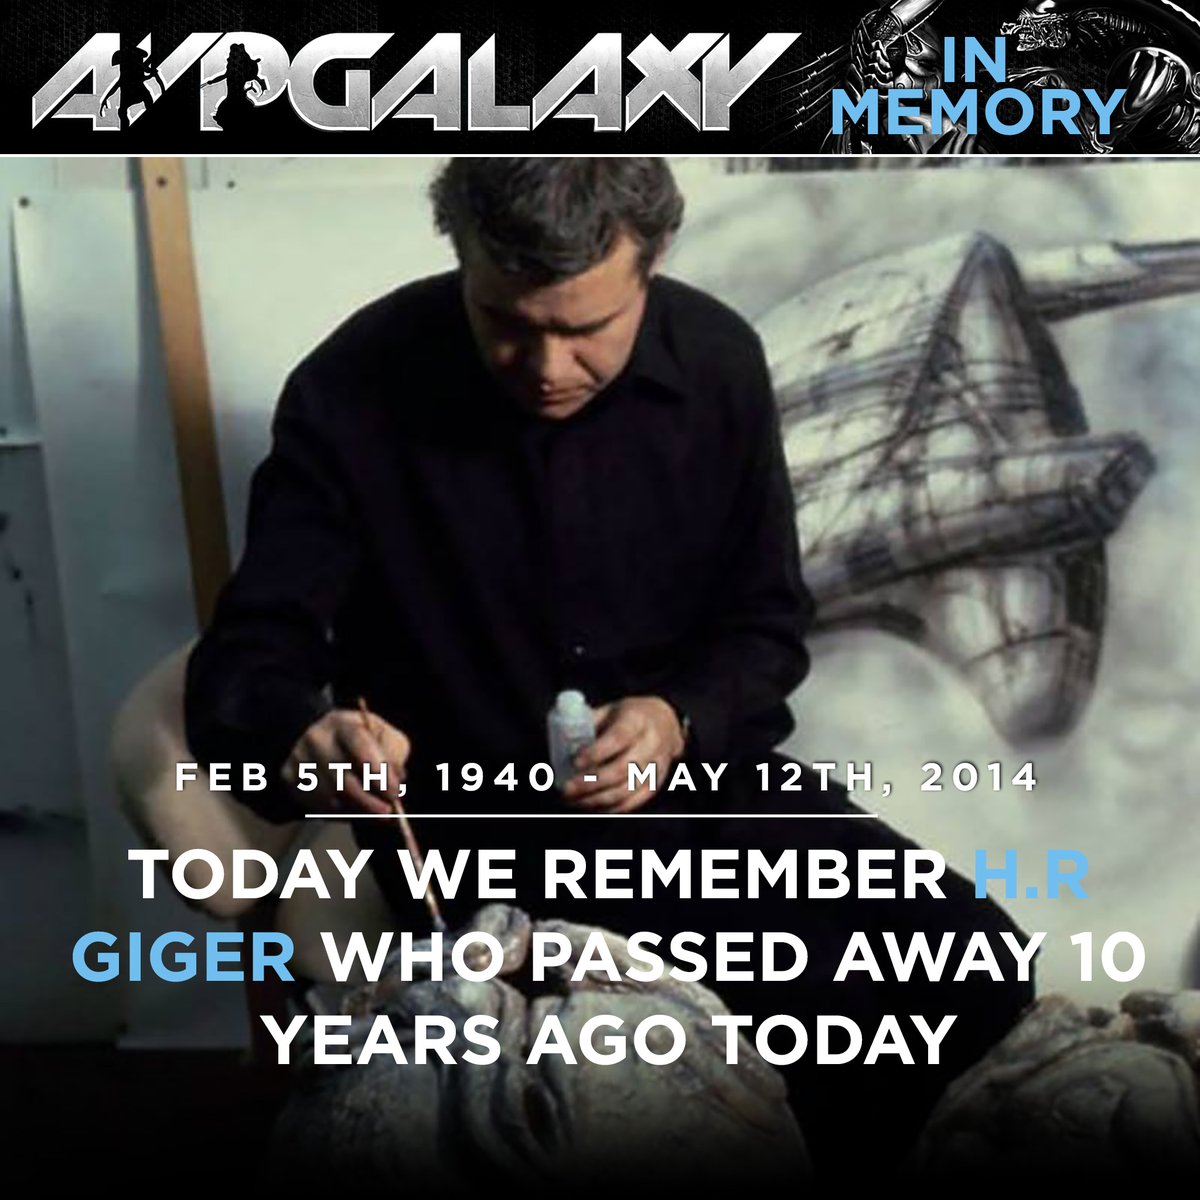 Today, the staff and community of Alien vs. Predator Galaxy are remembering the legendary H.R Giger on the 10th anniversary of his passing. #HRGiger #RIP #InMemory #Alien #Xenomorph #XenomorphXX121